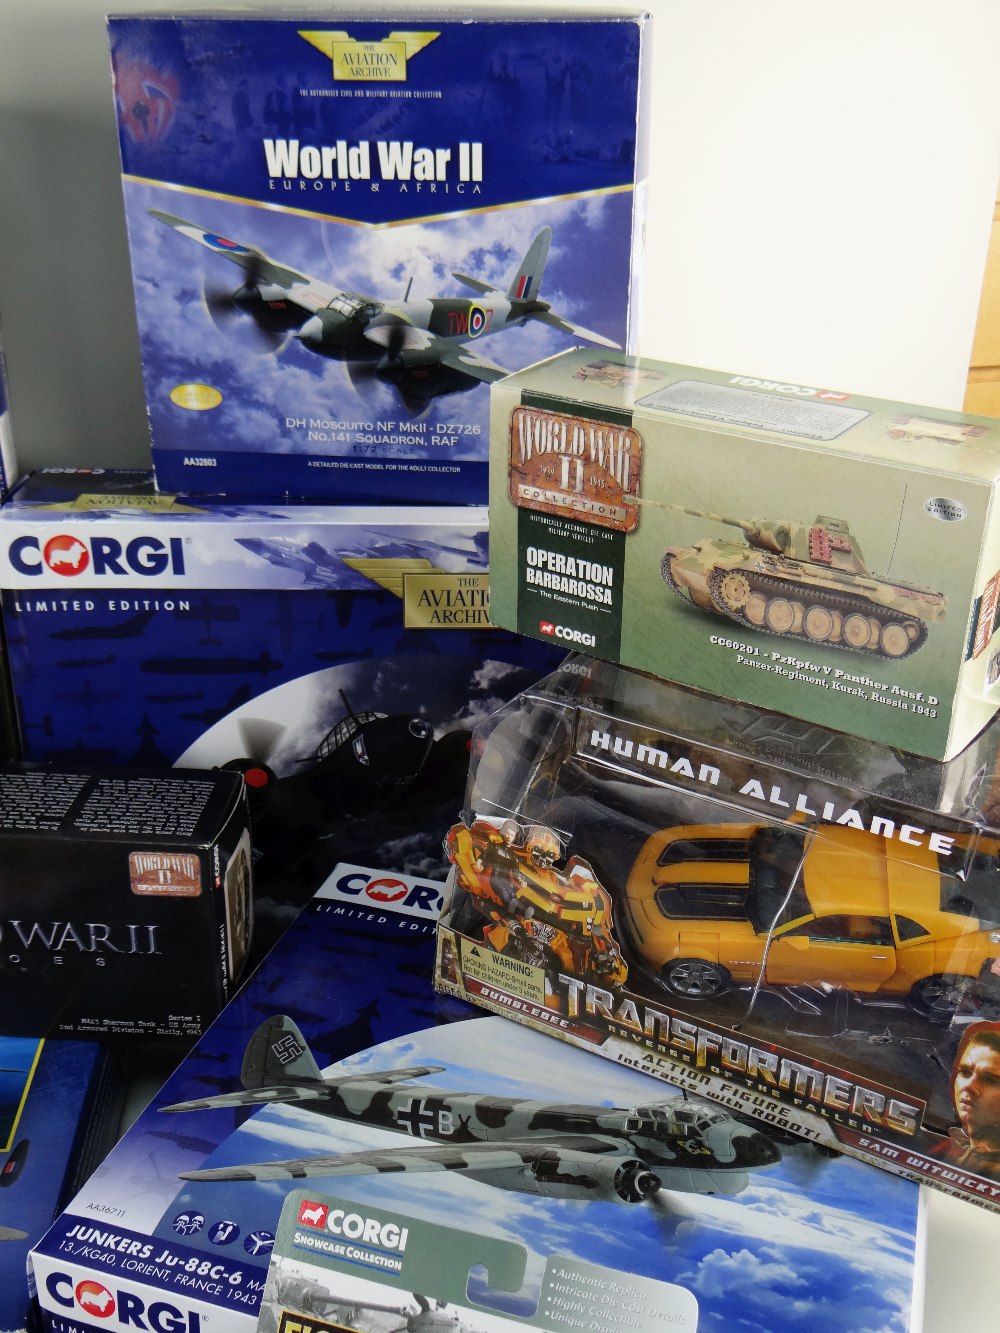 ASSORTED TOYS including Battle Star Galactica Colonial Viper, Corgi WWII Heroes Vehicles, Corgi - Image 2 of 5